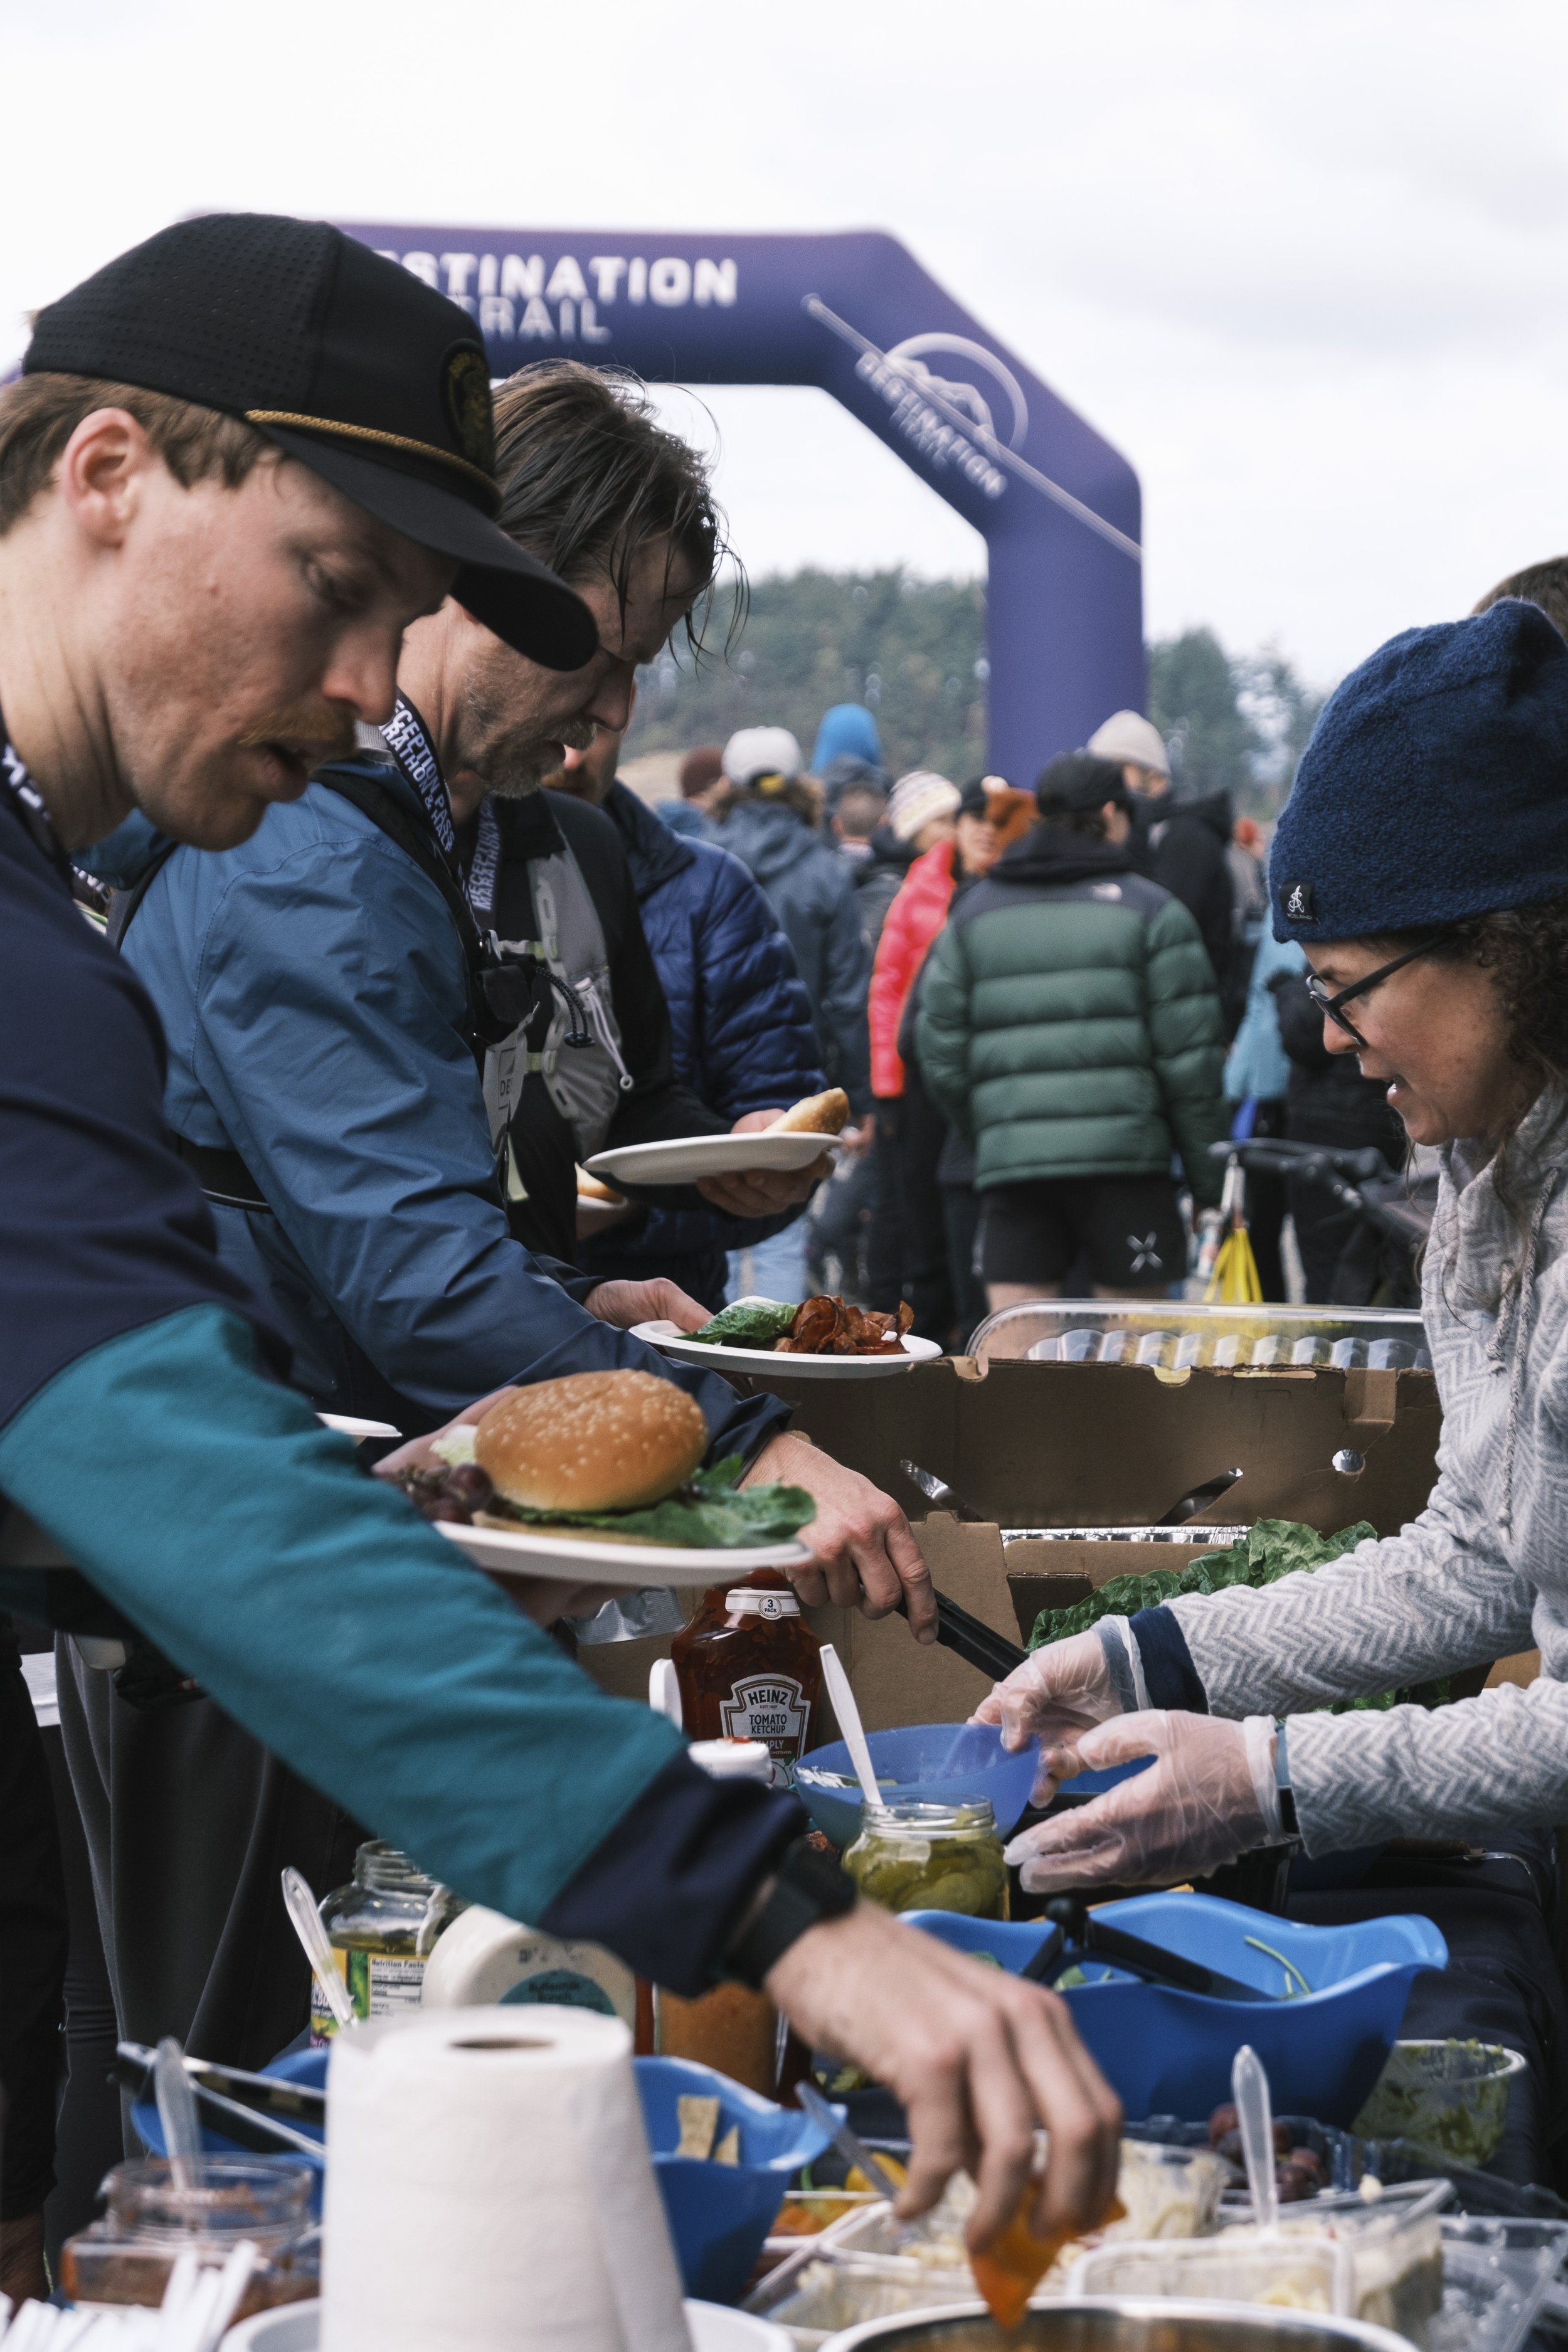 Runners eating from a buffet after a race